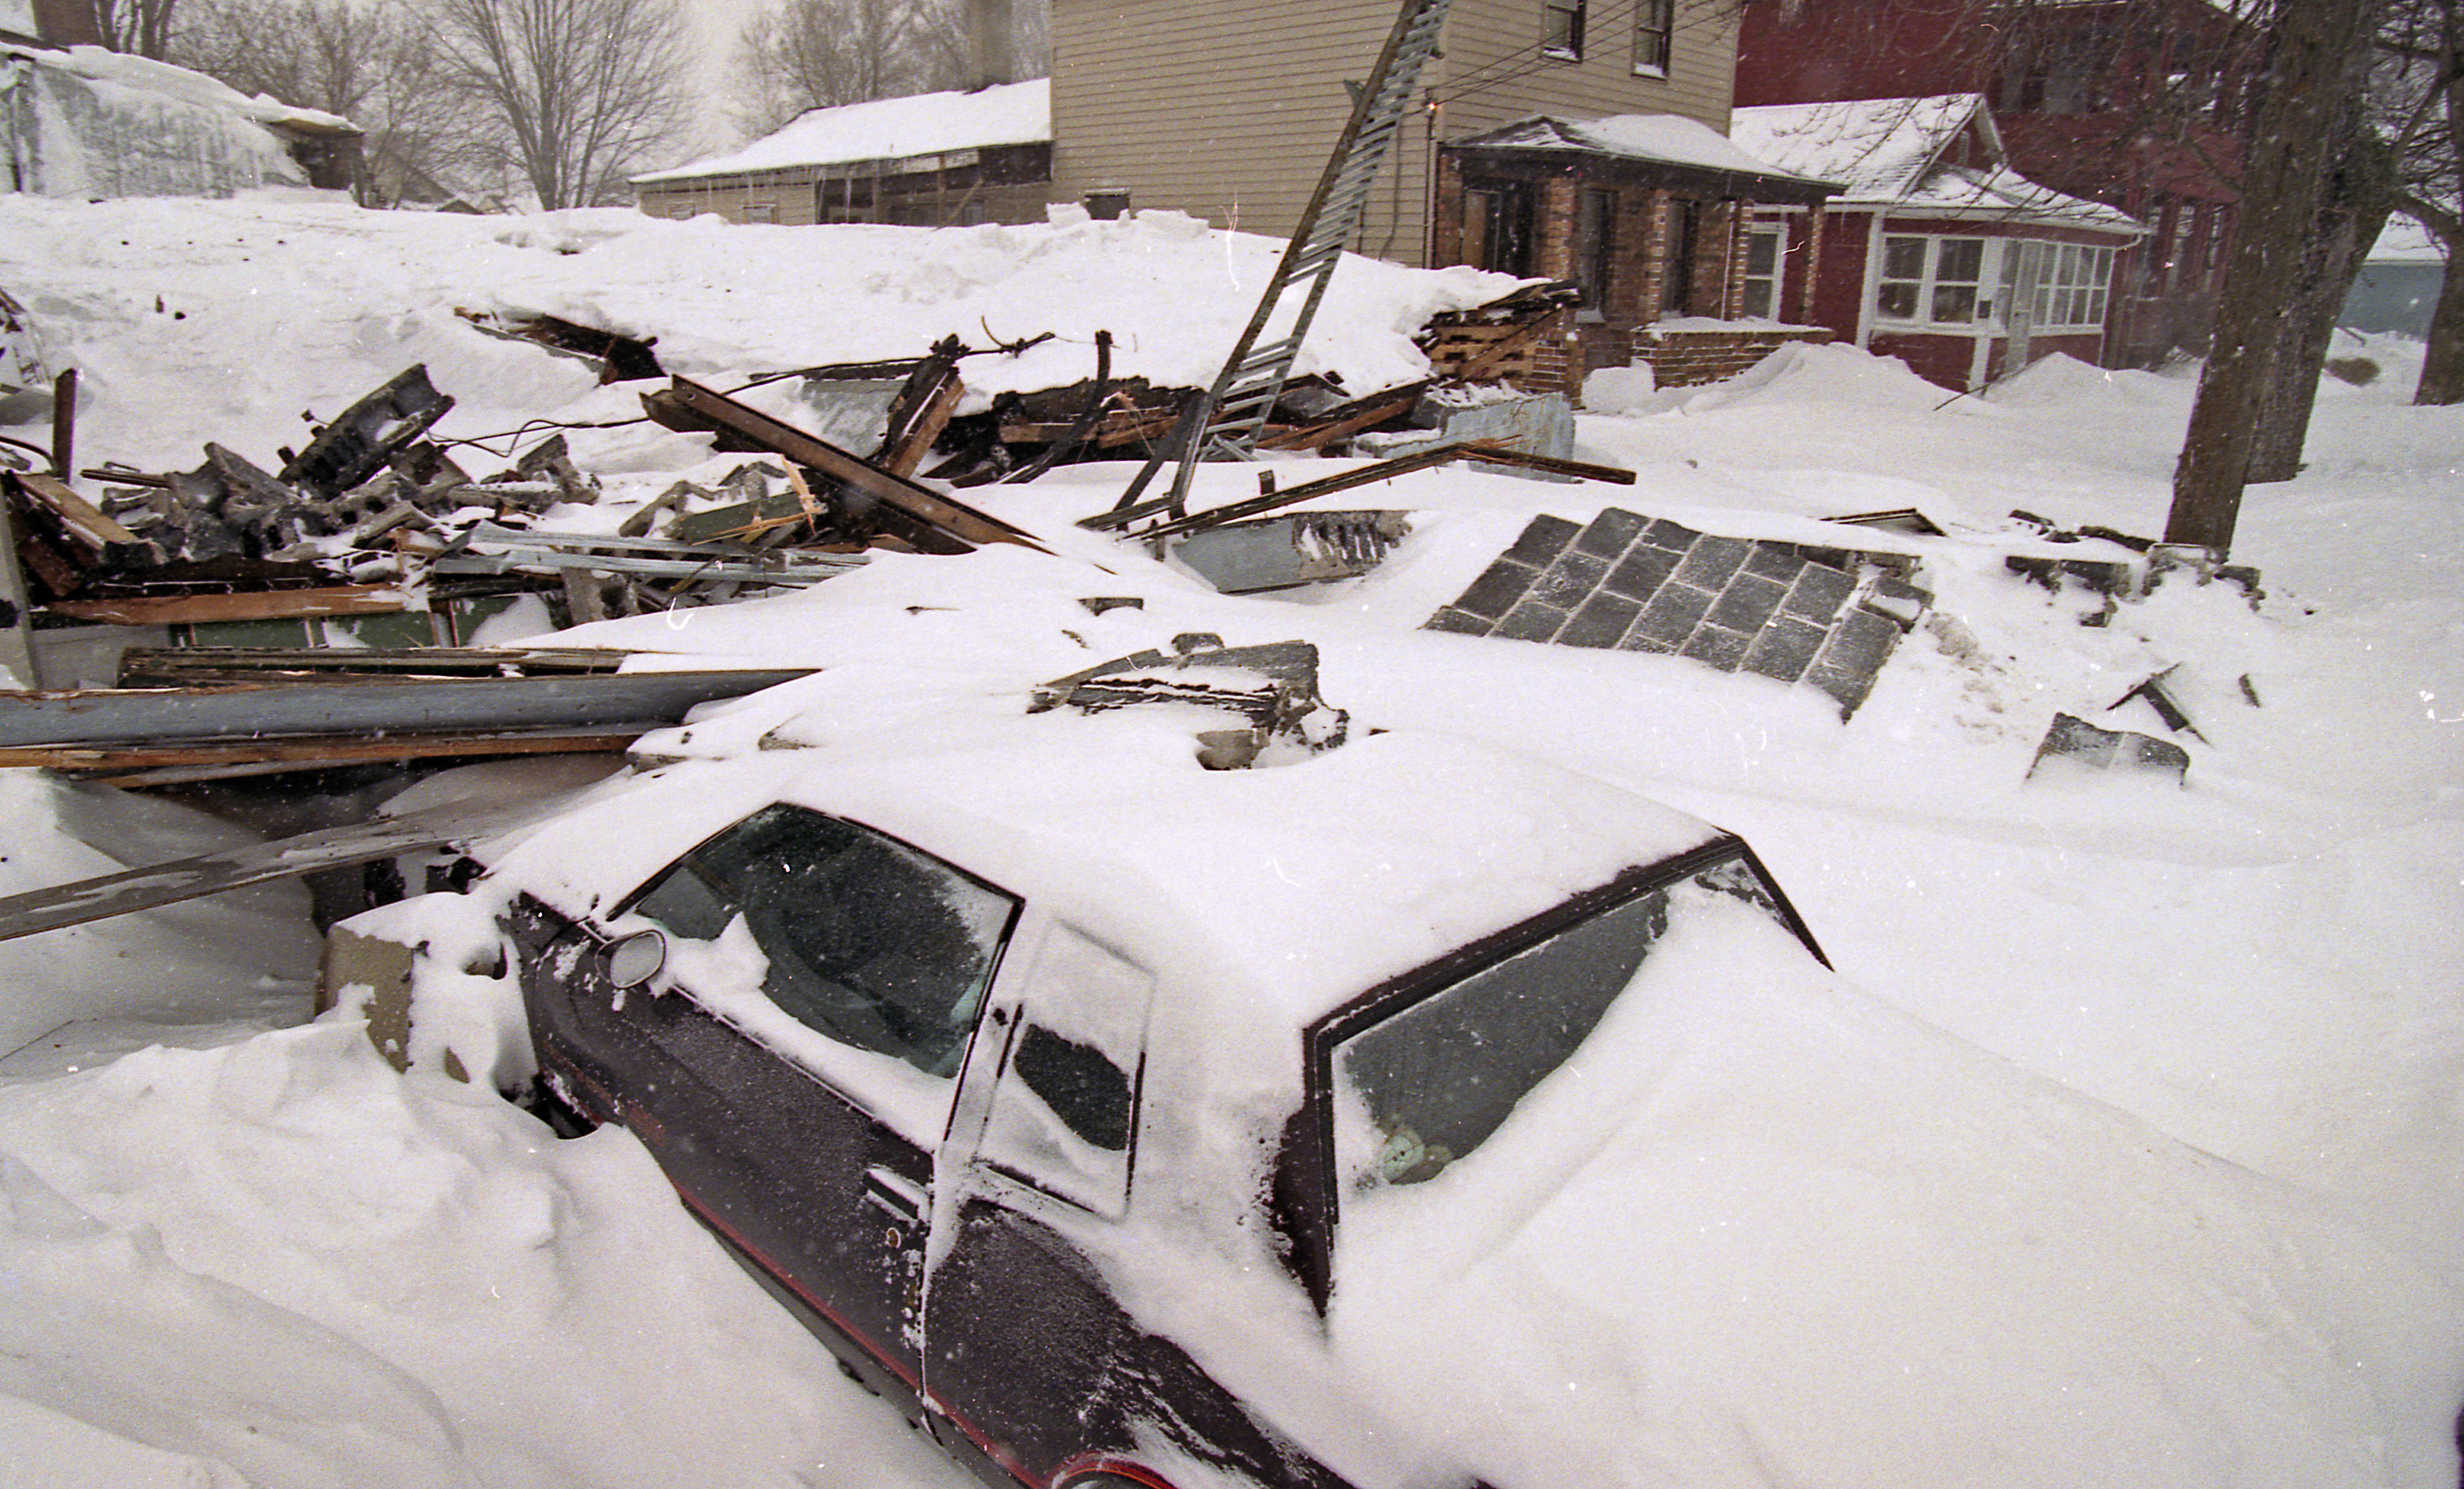 A roof collapsed from the weight of the snow at 308 Marcellus Street, Syracuse, following the Blizzard of '93.